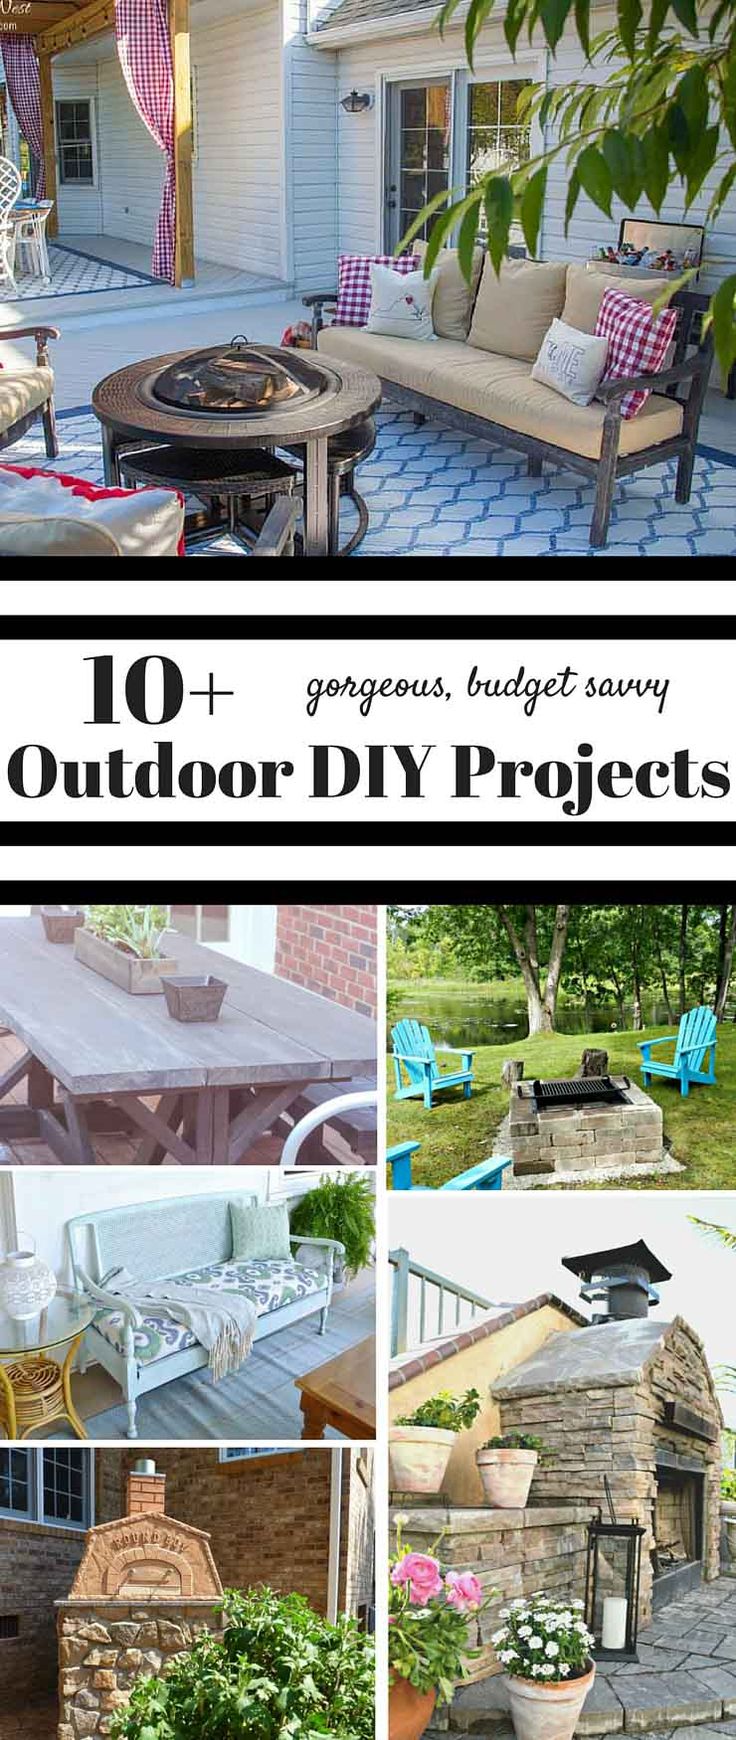 10+ budget savvy DIY Outdoor Projects from the DIY Housewives. Awesome ideas for...